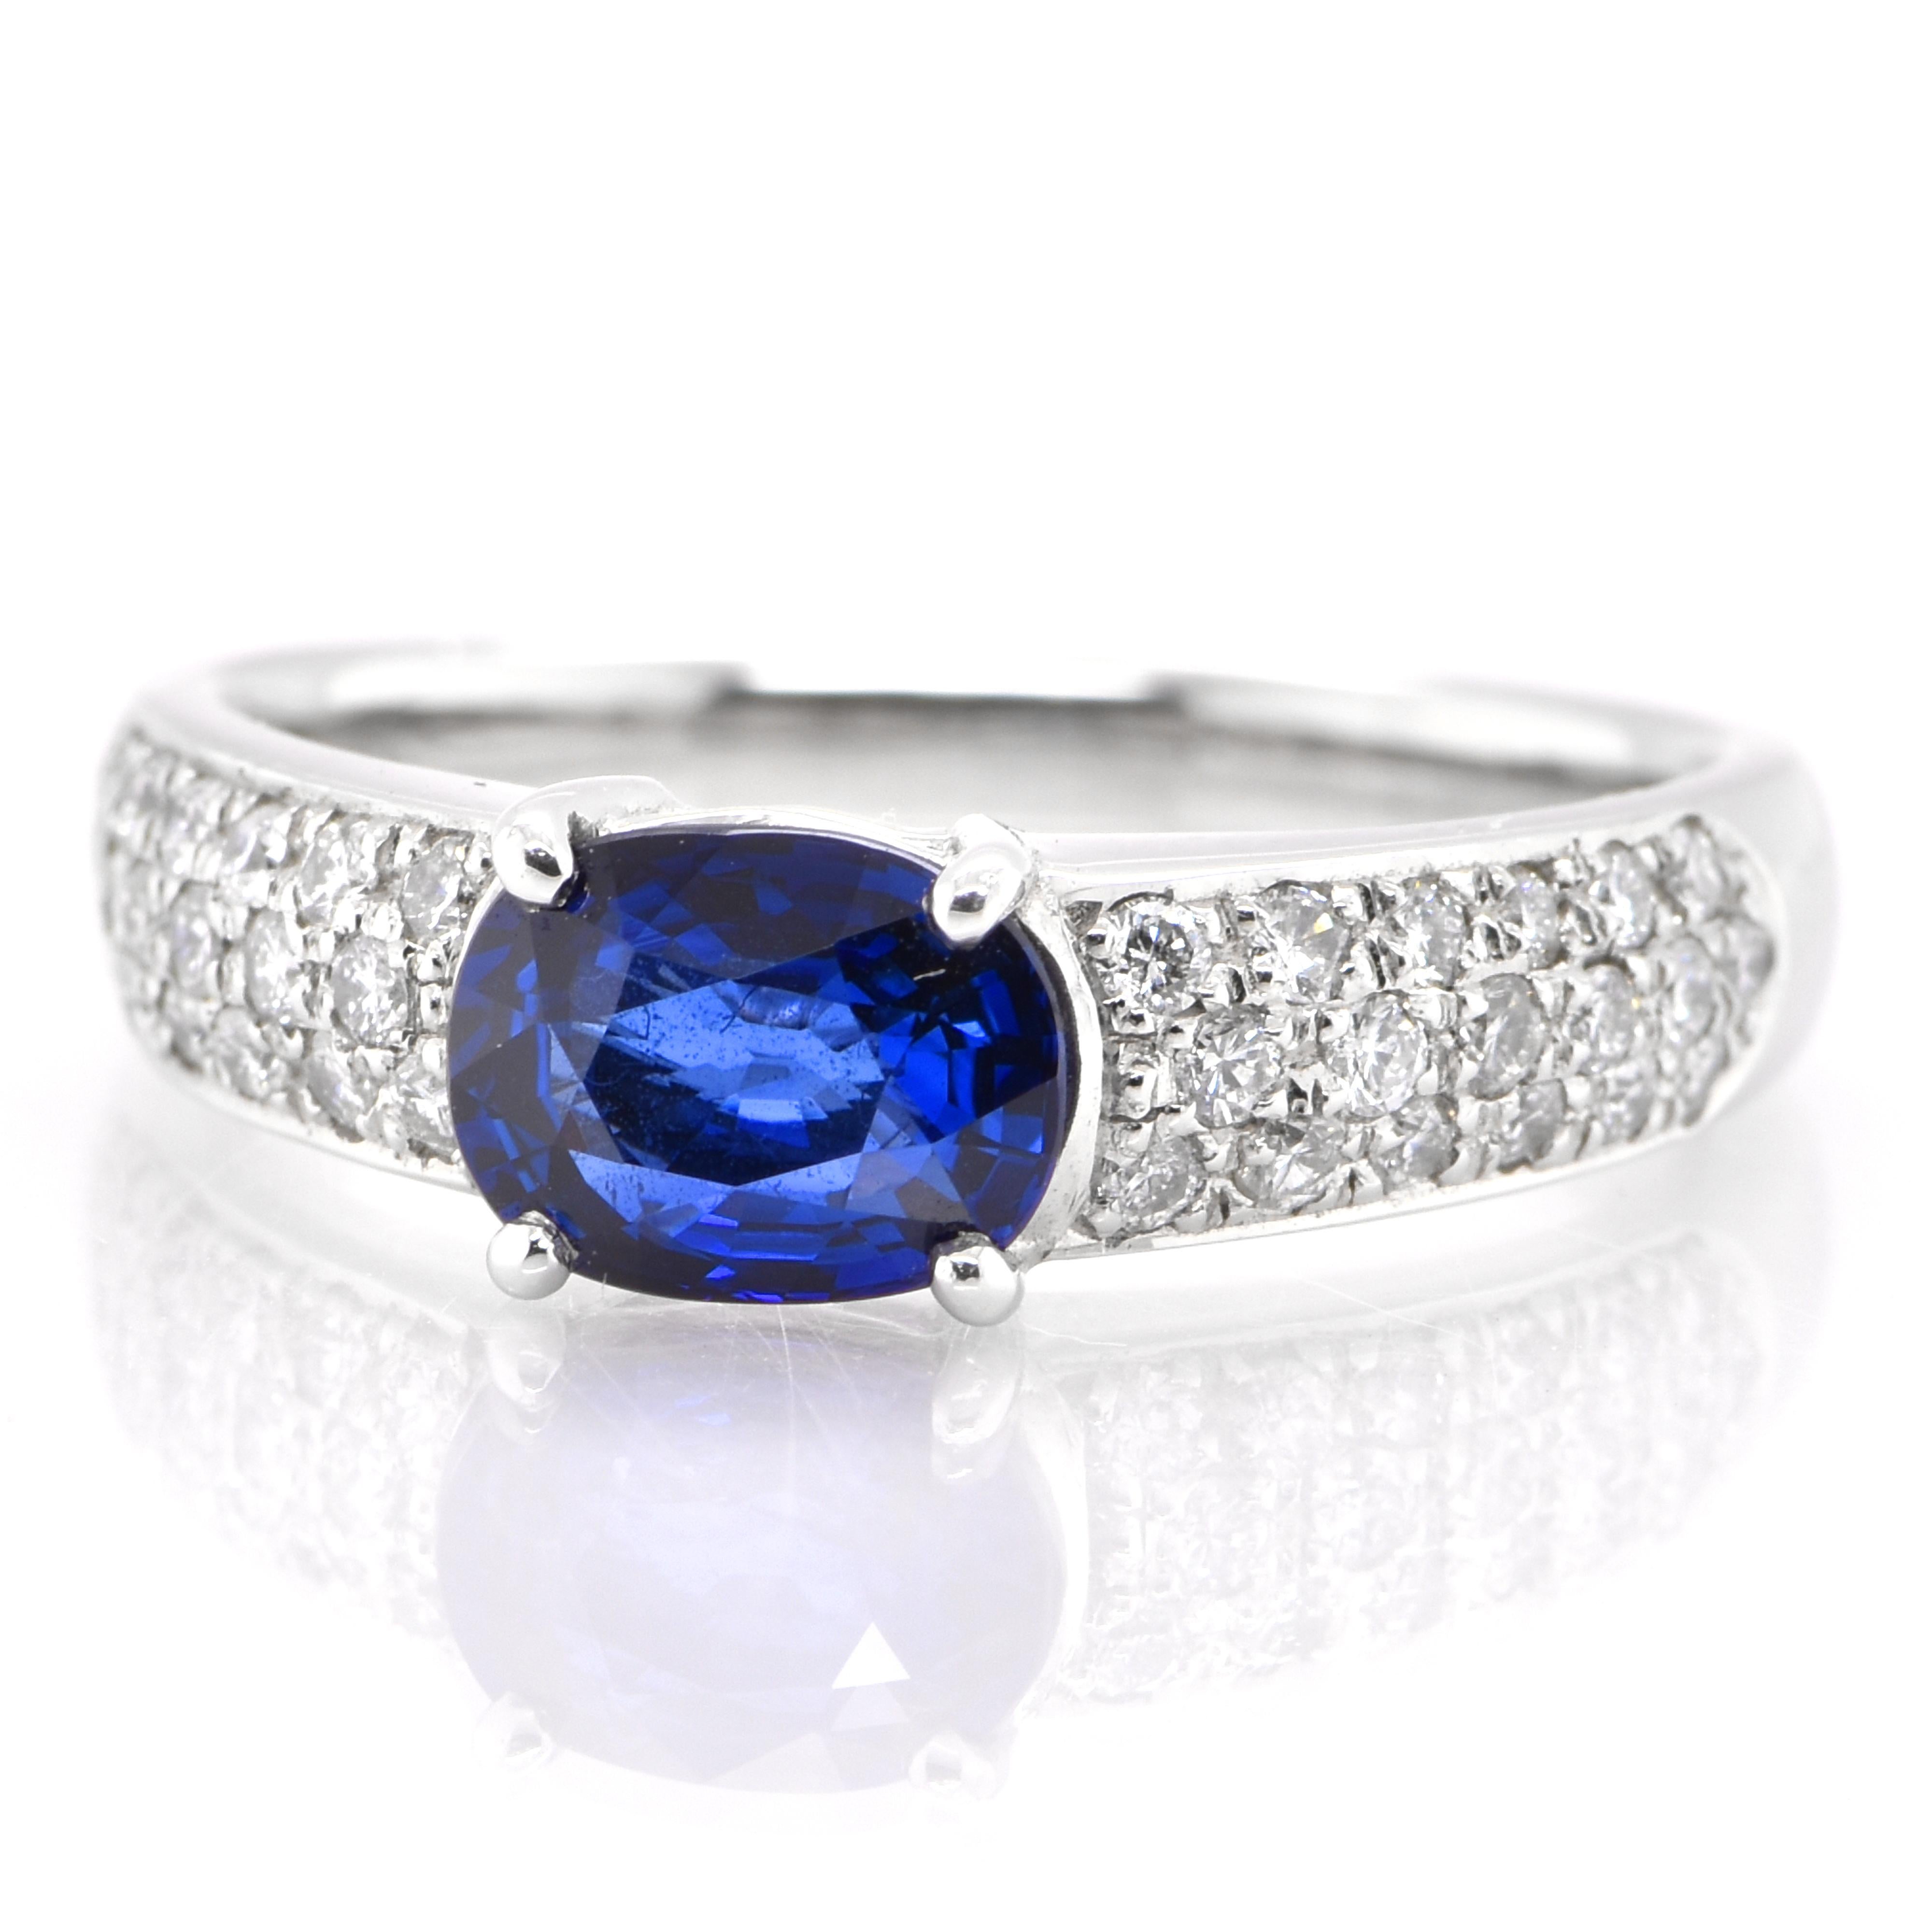 A beautiful band ring featuring AIGS Certified 1.17 Carat, Natural Royal Blue Sapphire and 0.32 Carats Diamond Accents set in Platinum. Sapphires have extraordinary durability - they excel in hardness as well as toughness and durability making them